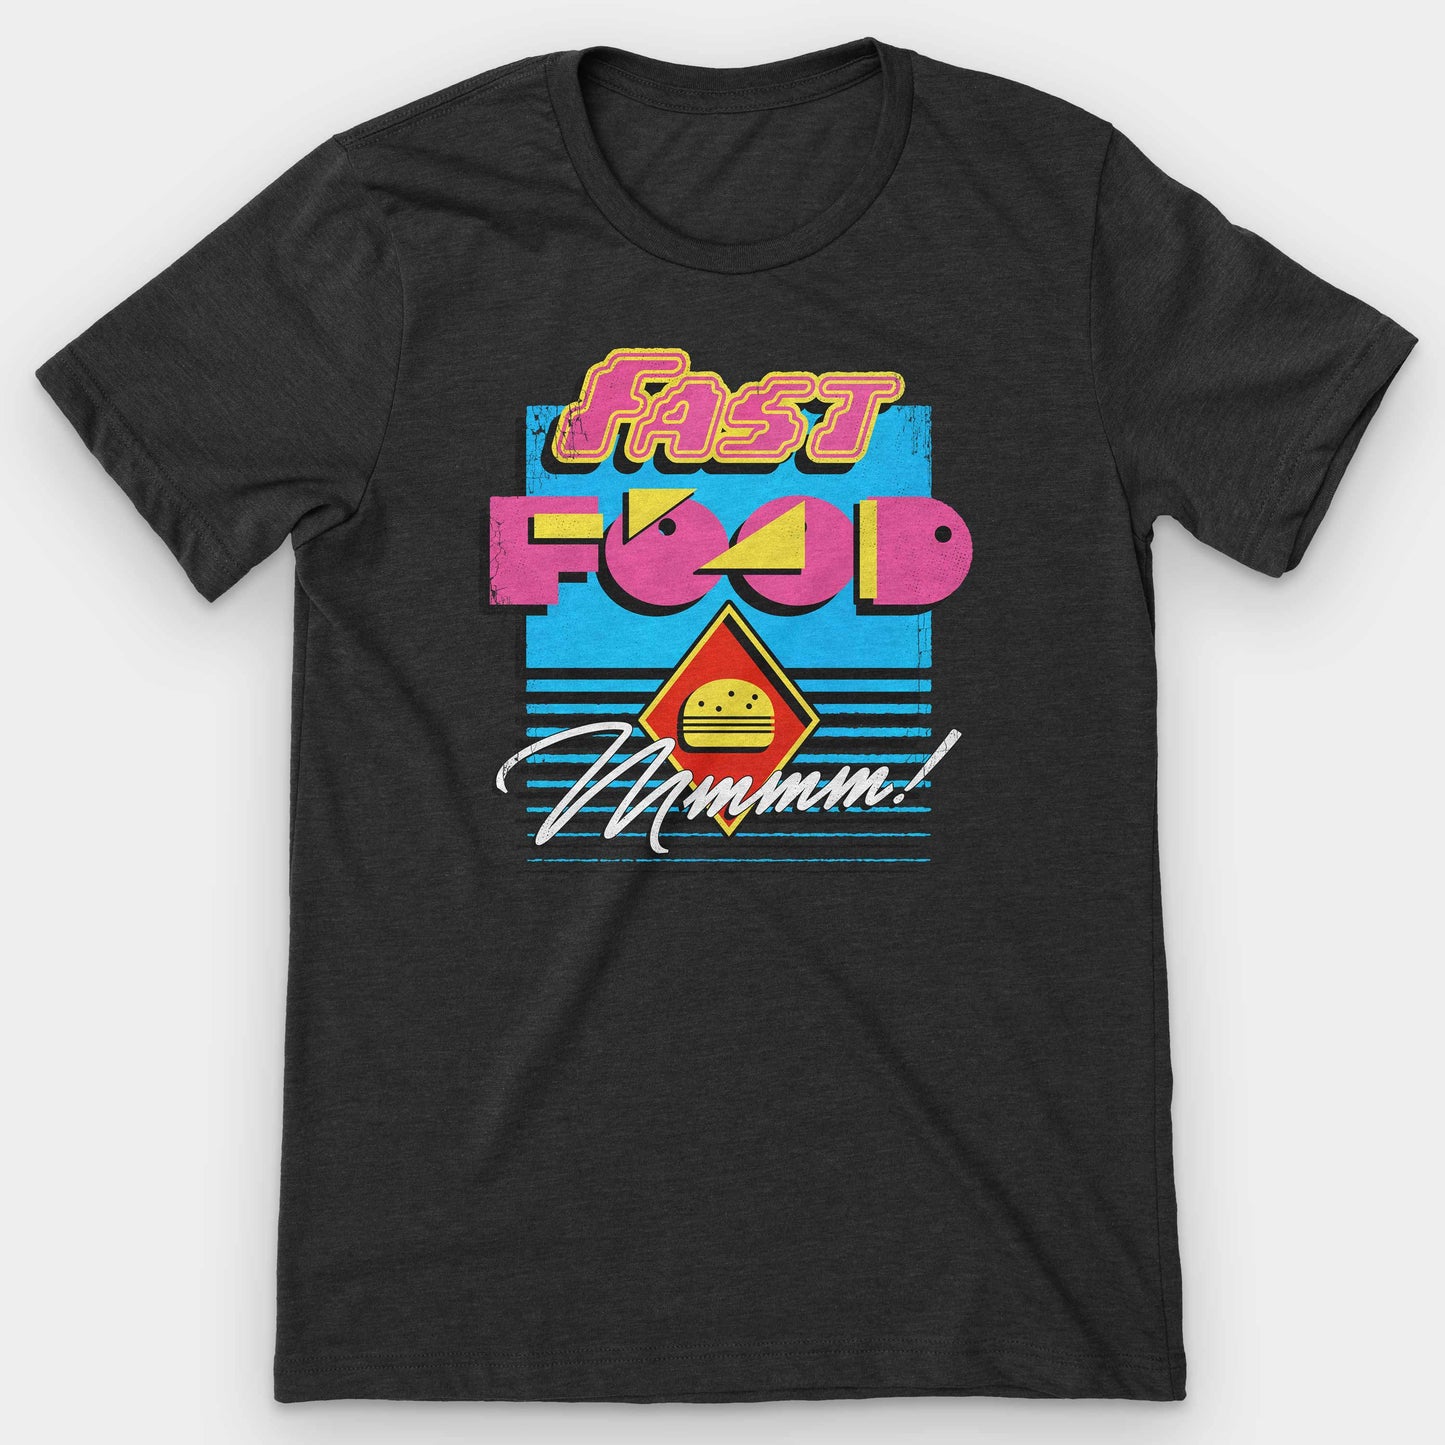 Black Heather 90s Fast Food Graphic T-Shirt by Snaxtime